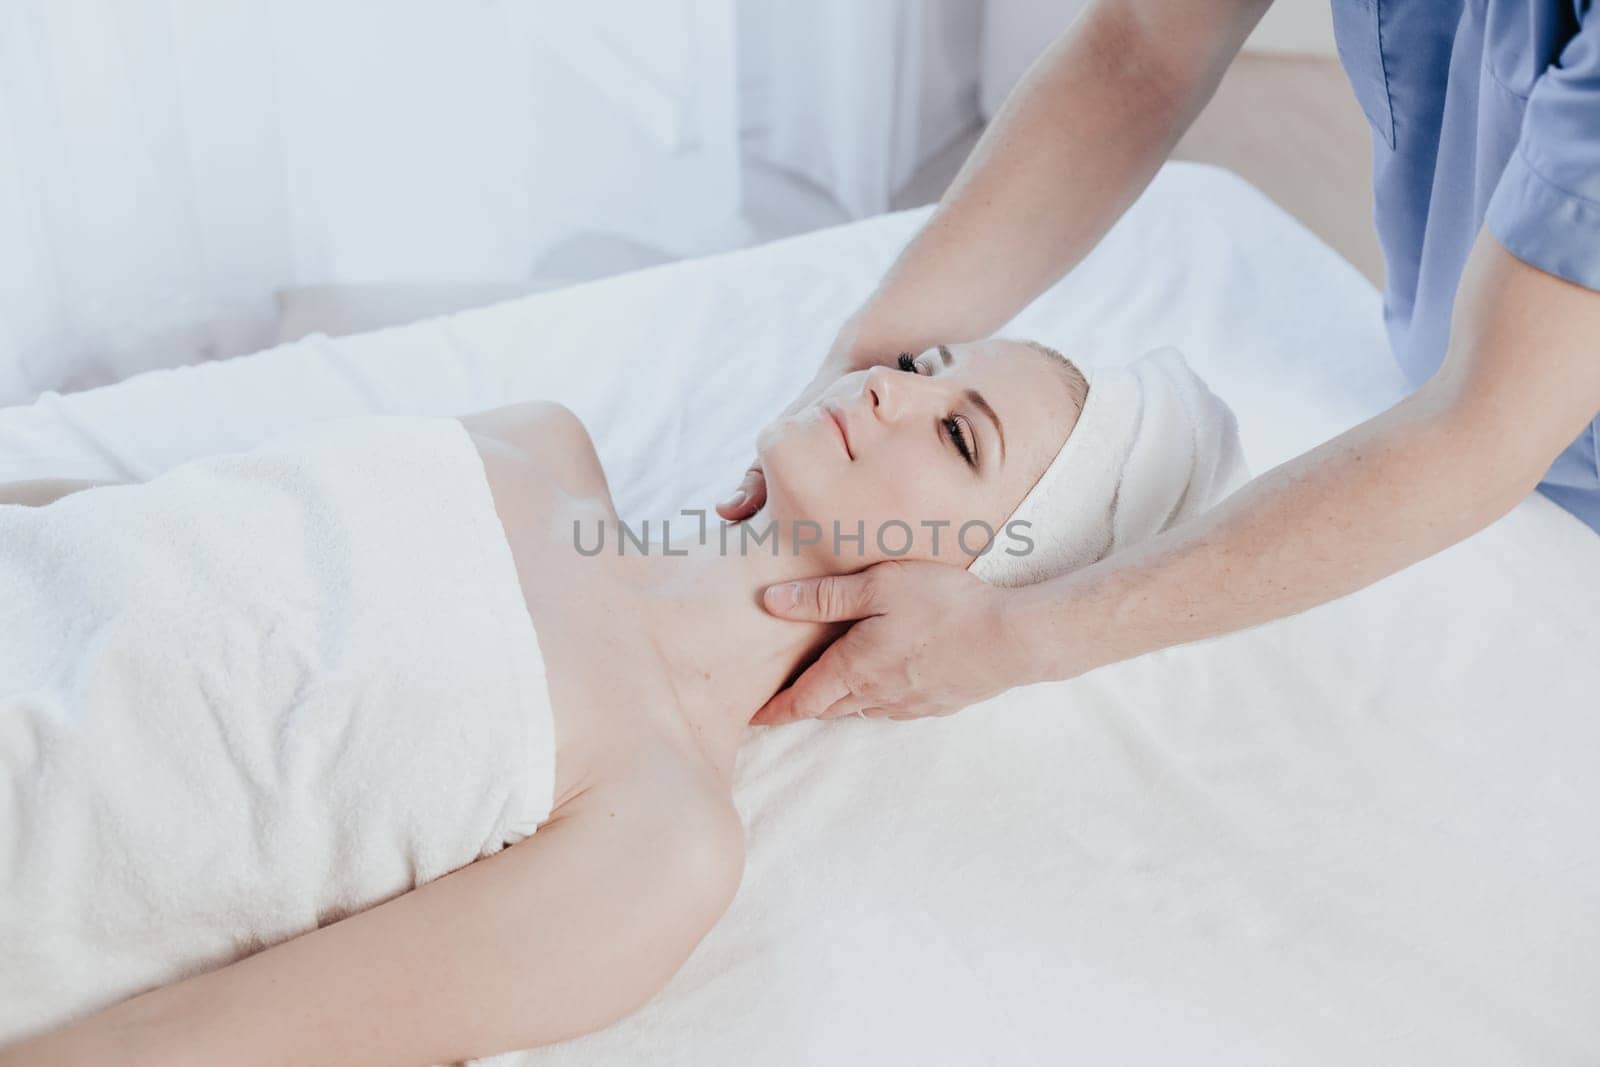 beautiful girl make massage therapy neck in Spa 1